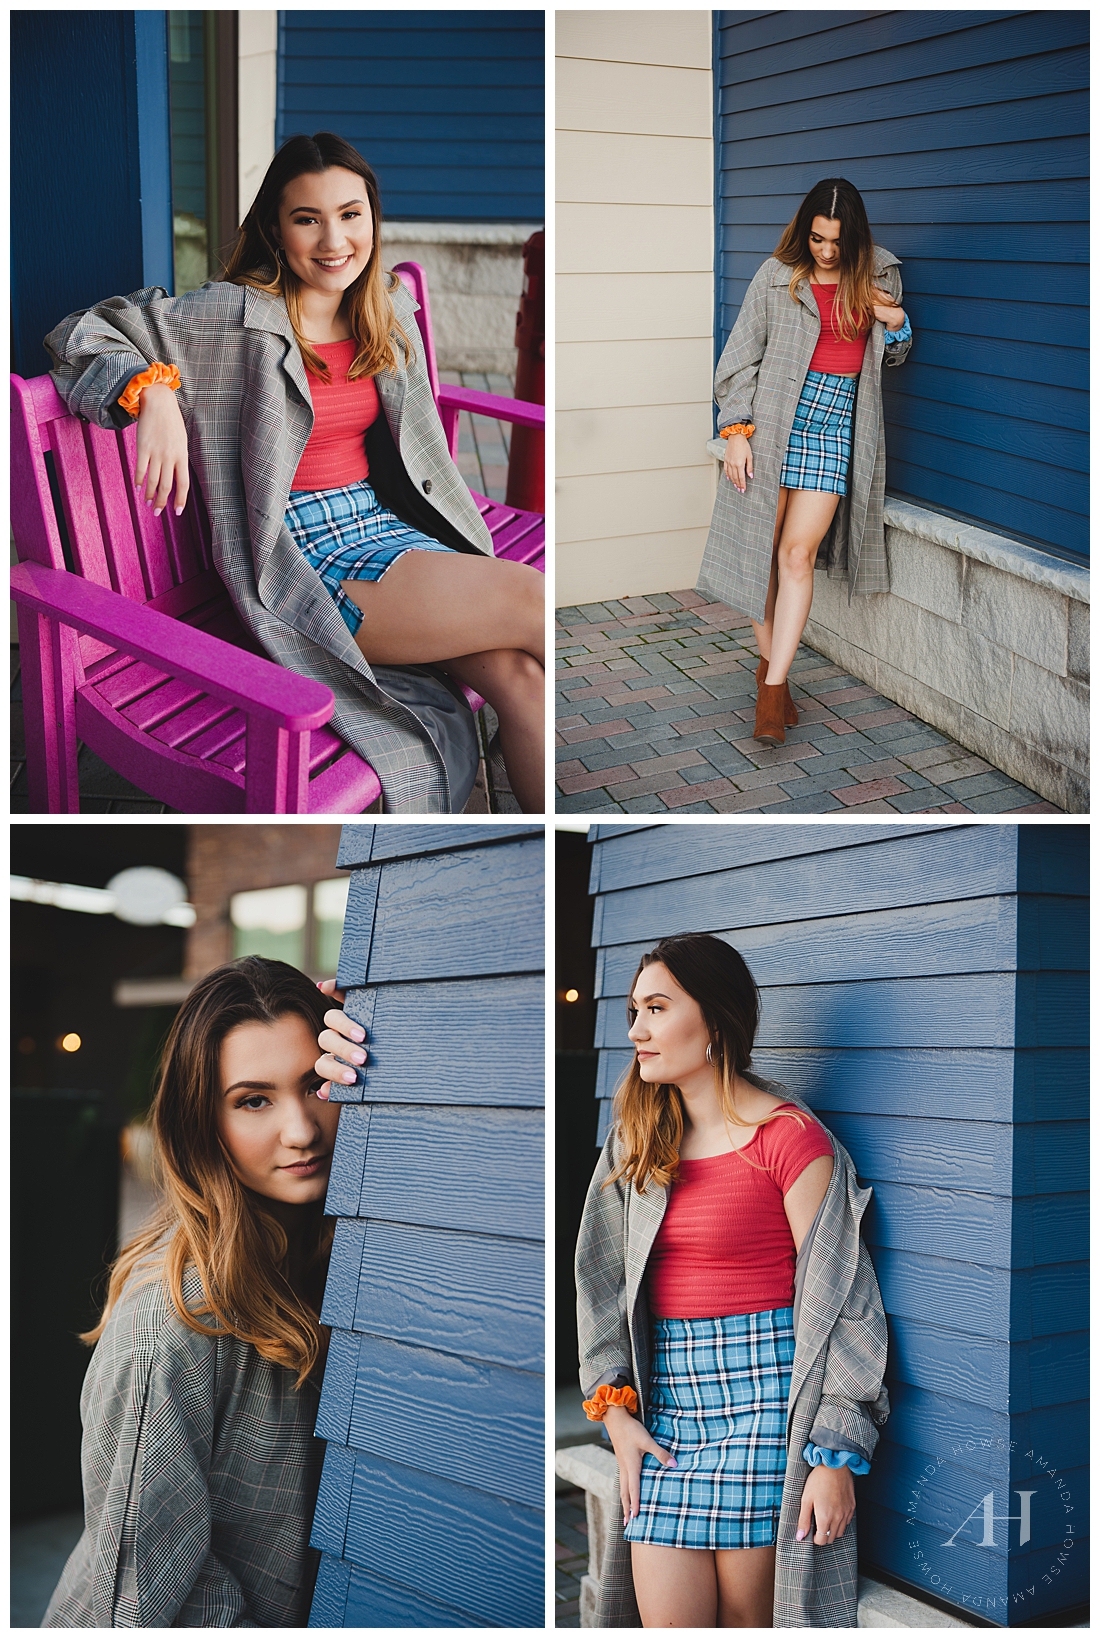 Timeless Senior Portraits | Trendy Fall Outfits with Plaid Trench Coat | Photographed by Amanda Howse